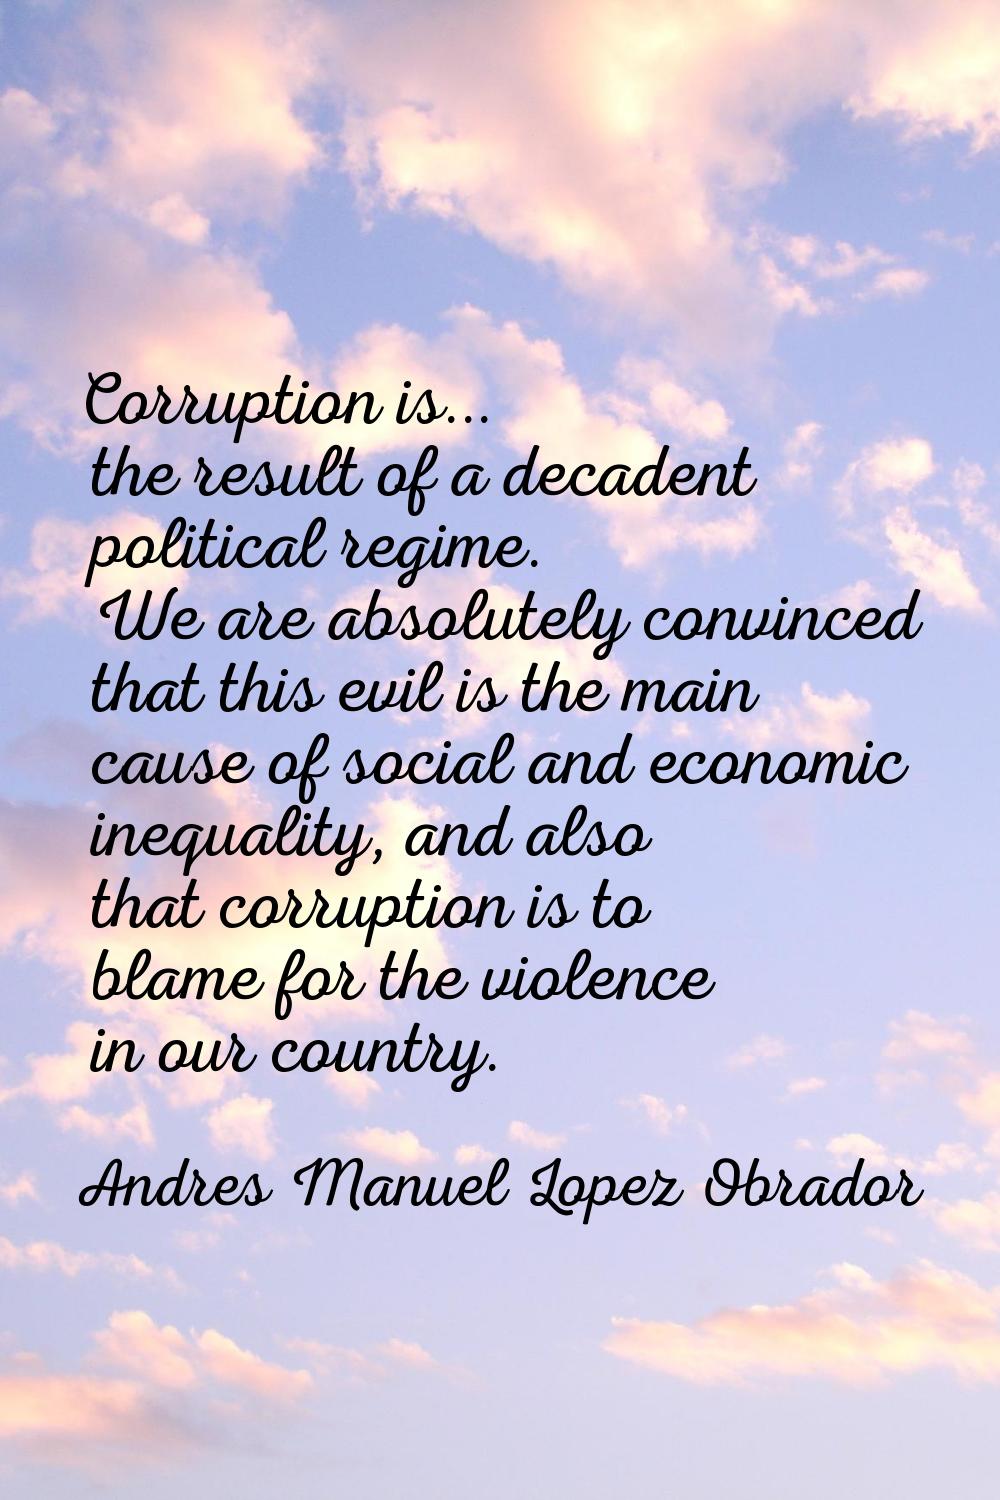 Corruption is... the result of a decadent political regime. We are absolutely convinced that this e